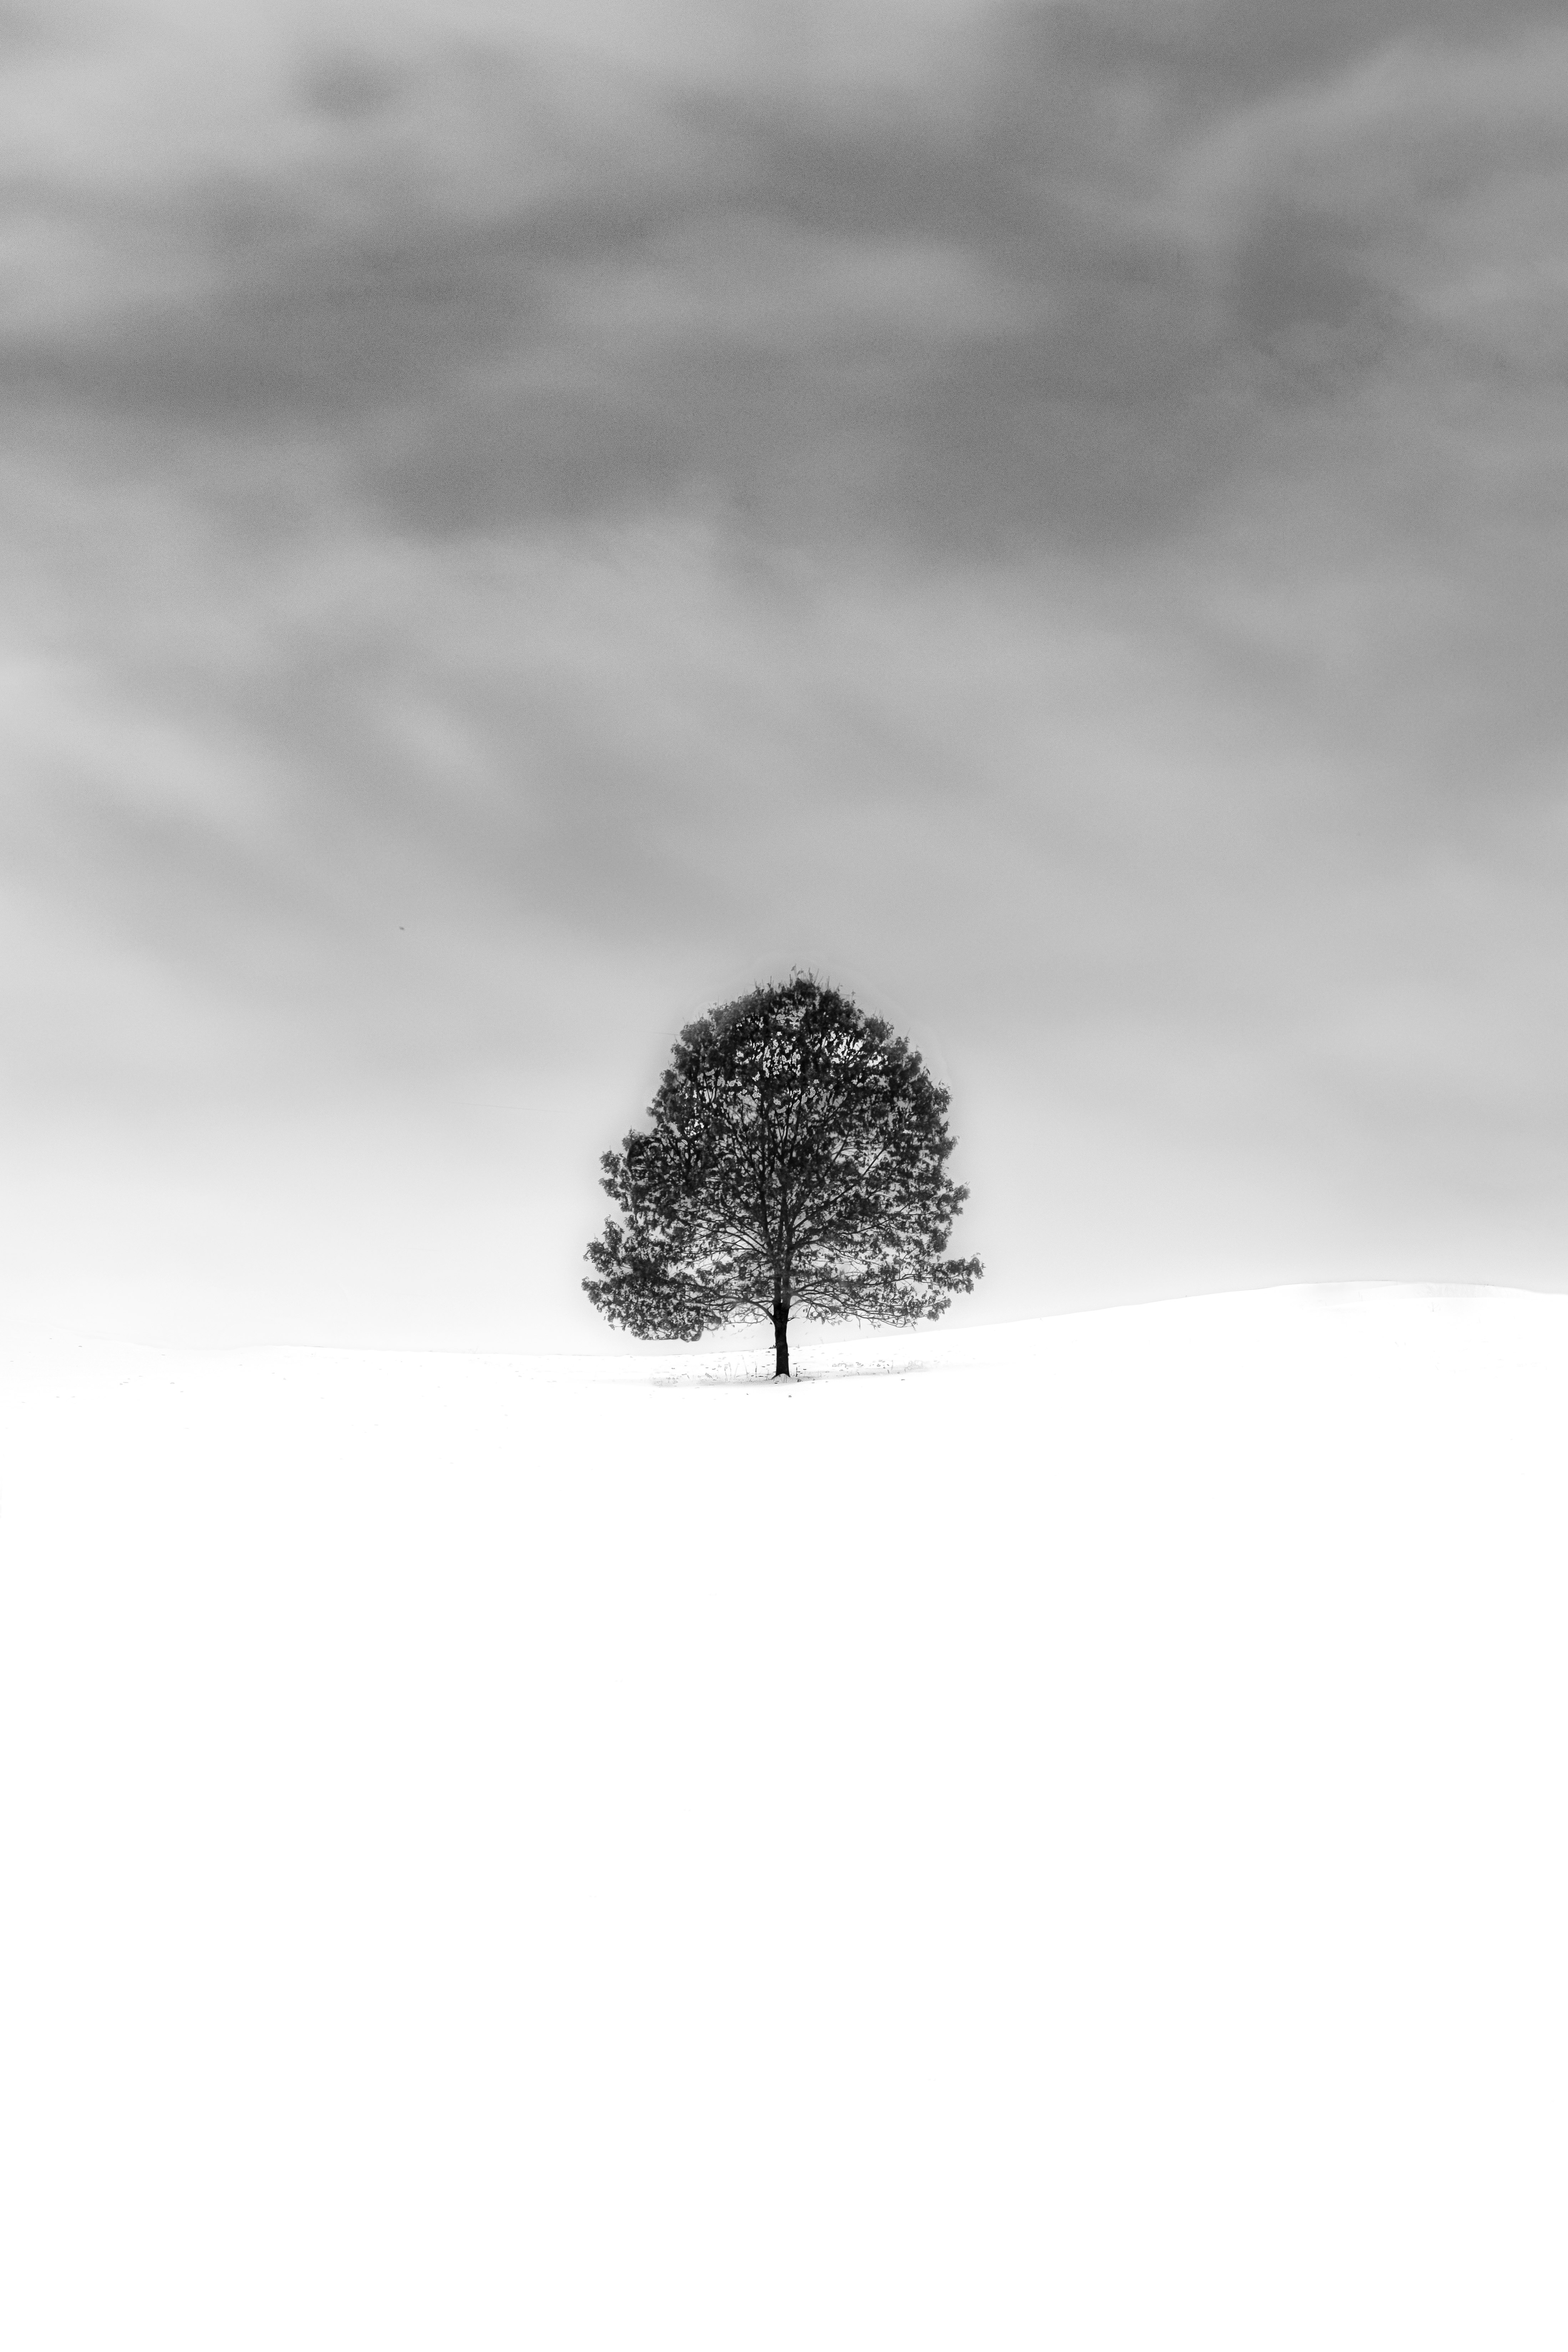 Love the simplicity of winter photography.  This is just a random tree on a random hill in my home town, but the snow falling and the starkness and contrast really made this interesting.  